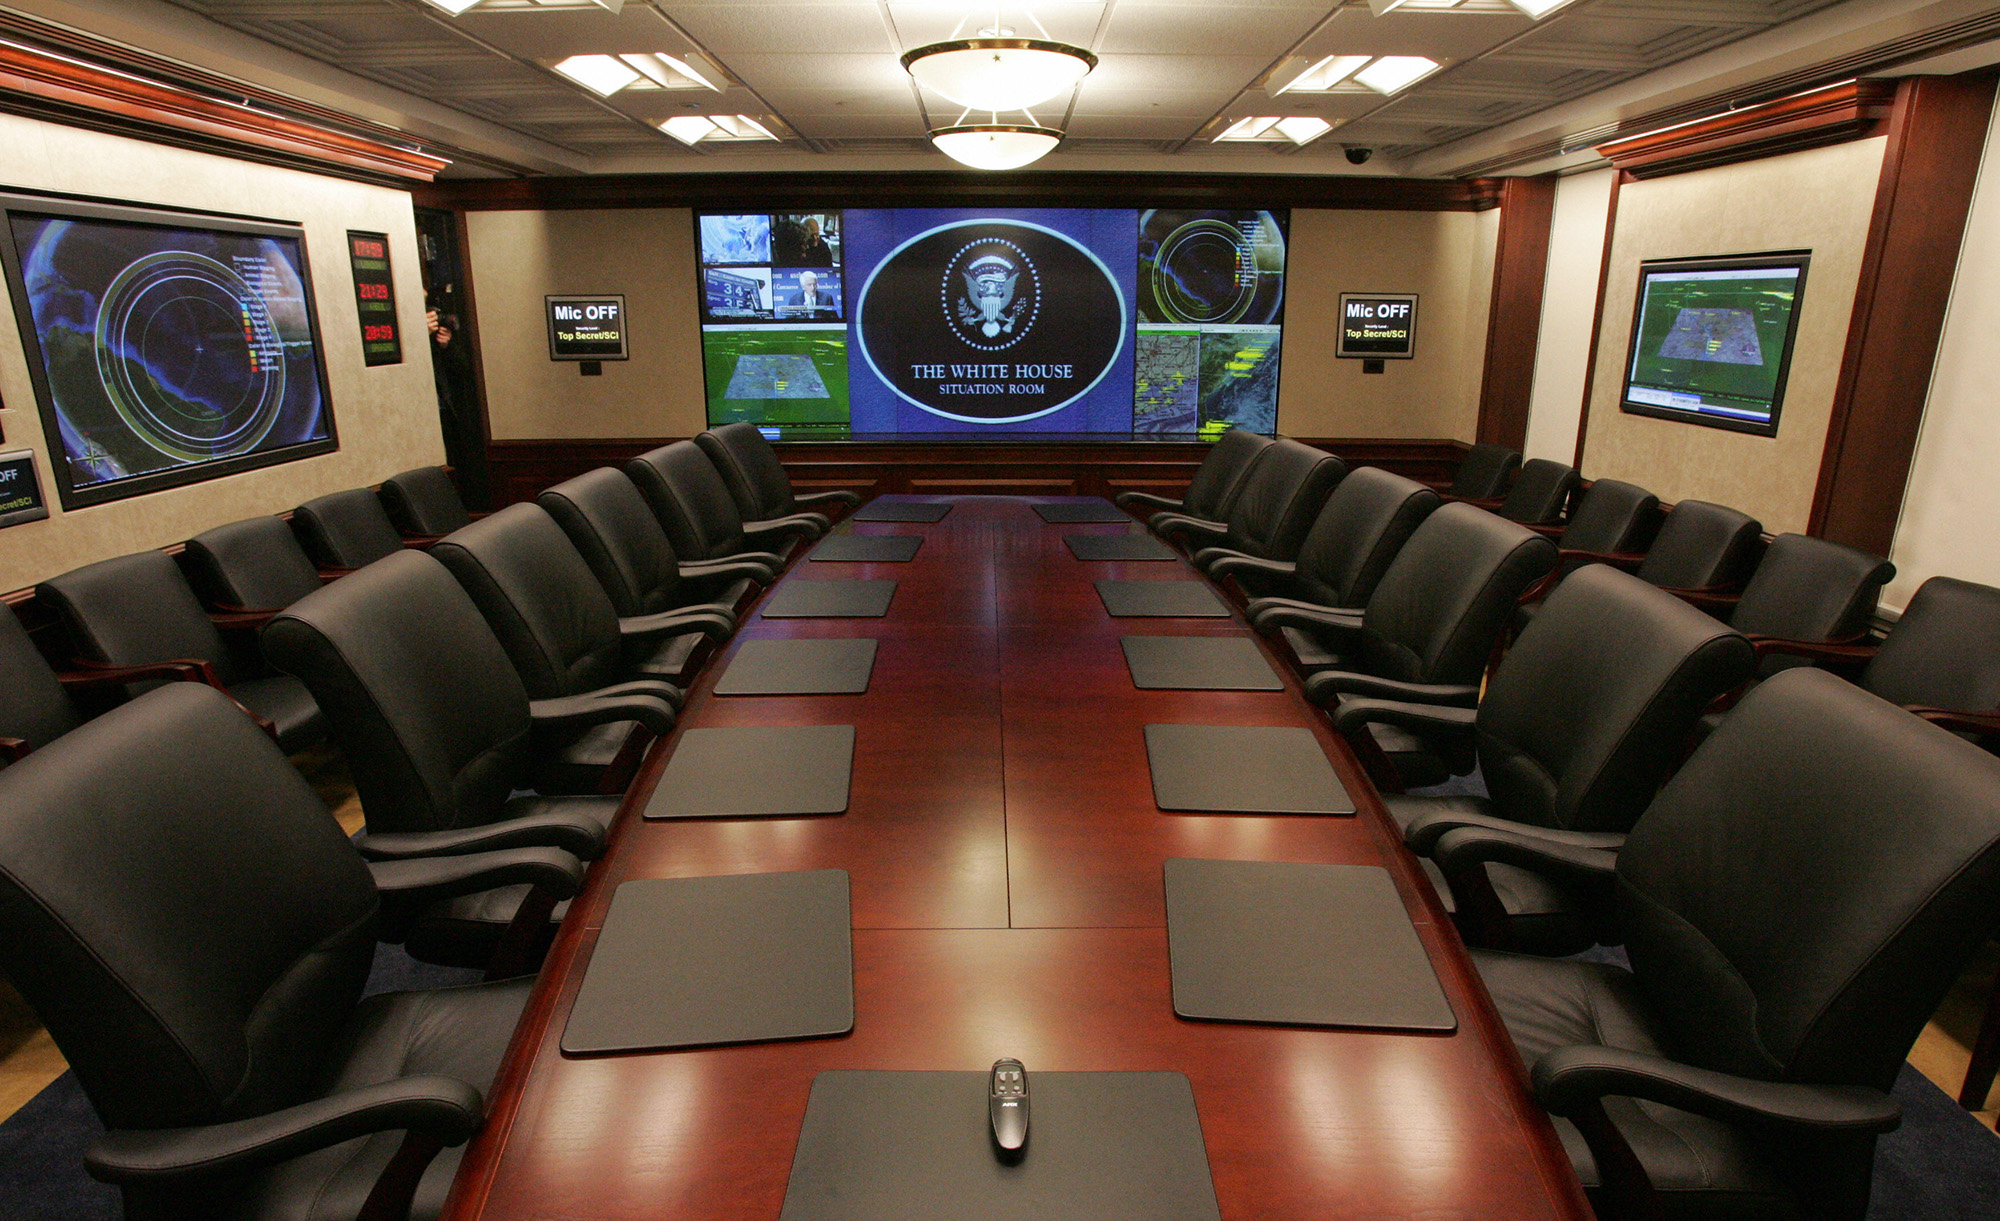 Washington, UNITED STATES: The main conference room is shown inside the Situation Room complex at the White House in Washington, DC, 18 May 2007. In 2006, the Situation Room, where the US president receives security briefings, was renovated with updated technology and allows secure video conferencing with world leaders. AFP PHOTO/SAUL LOEB (Photo credit should read SAUL LOEB/AFP via Getty Images)